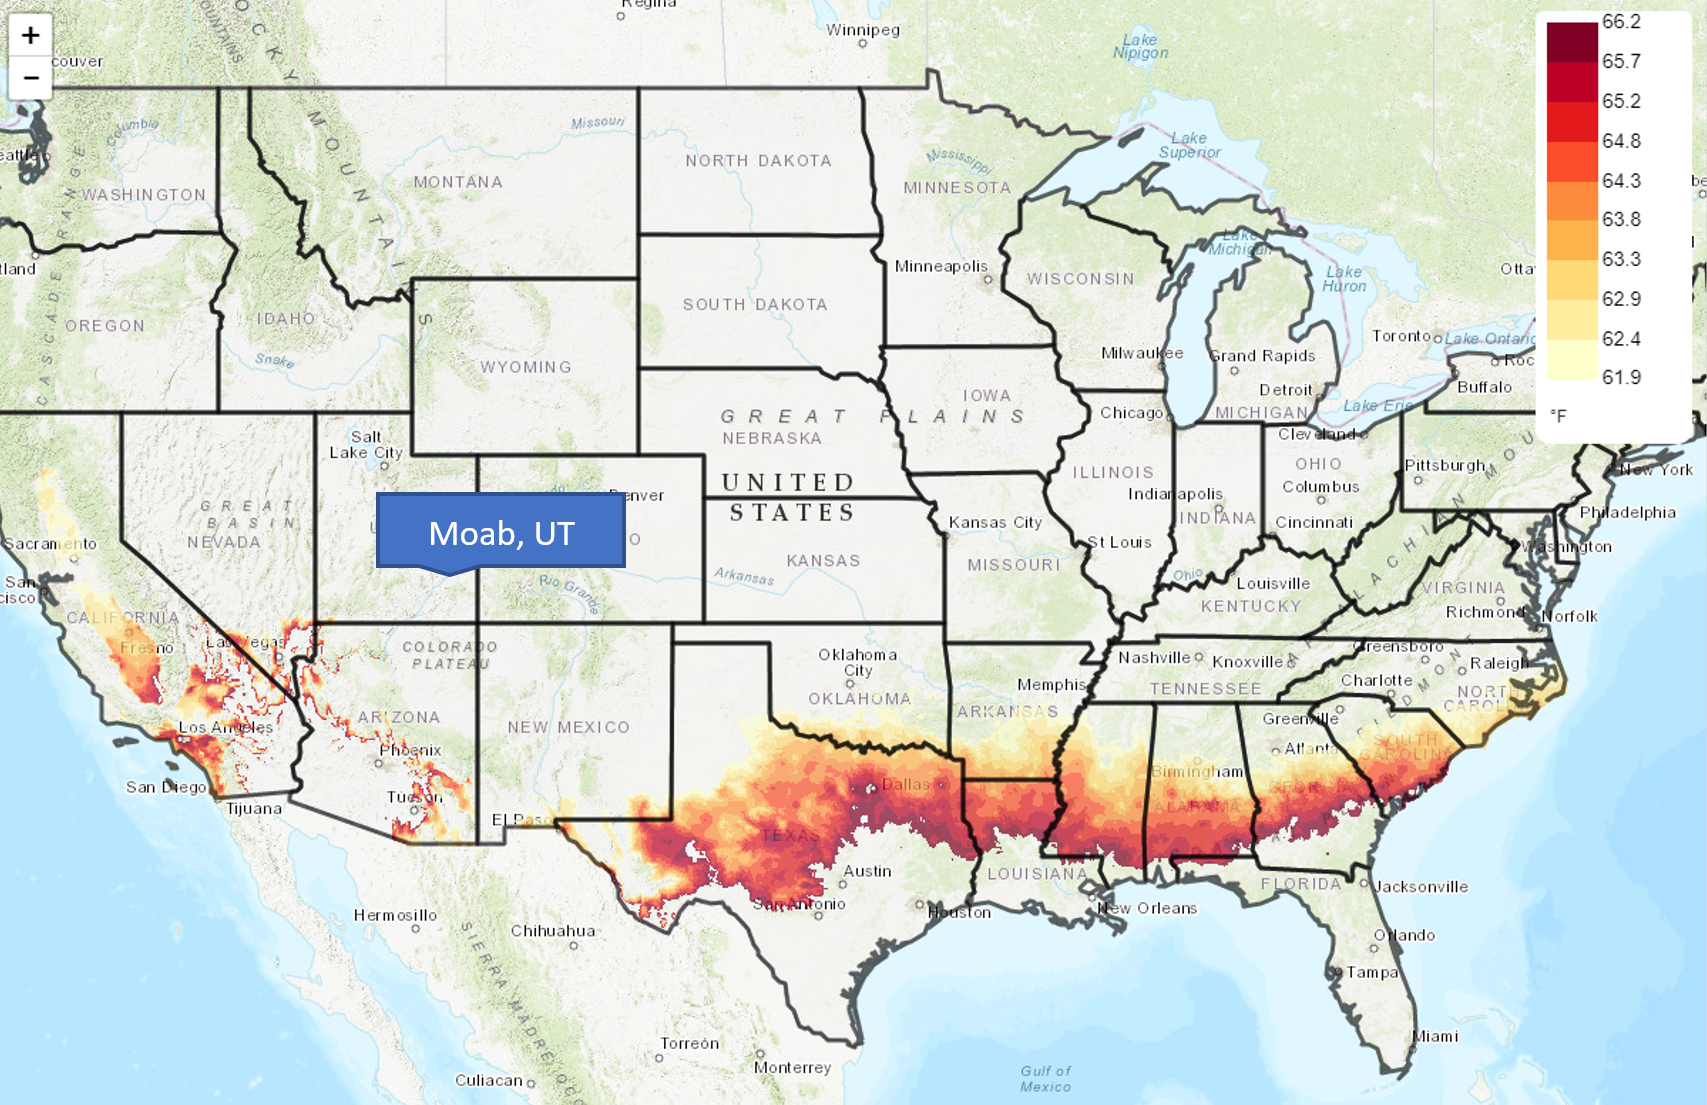 Map of the US with Moab, UT identified. A swath of color ranging from yellow to red stretches from Central Texas to the South Carolina coast, indicating average temperatures of 62 to 66 degrees F